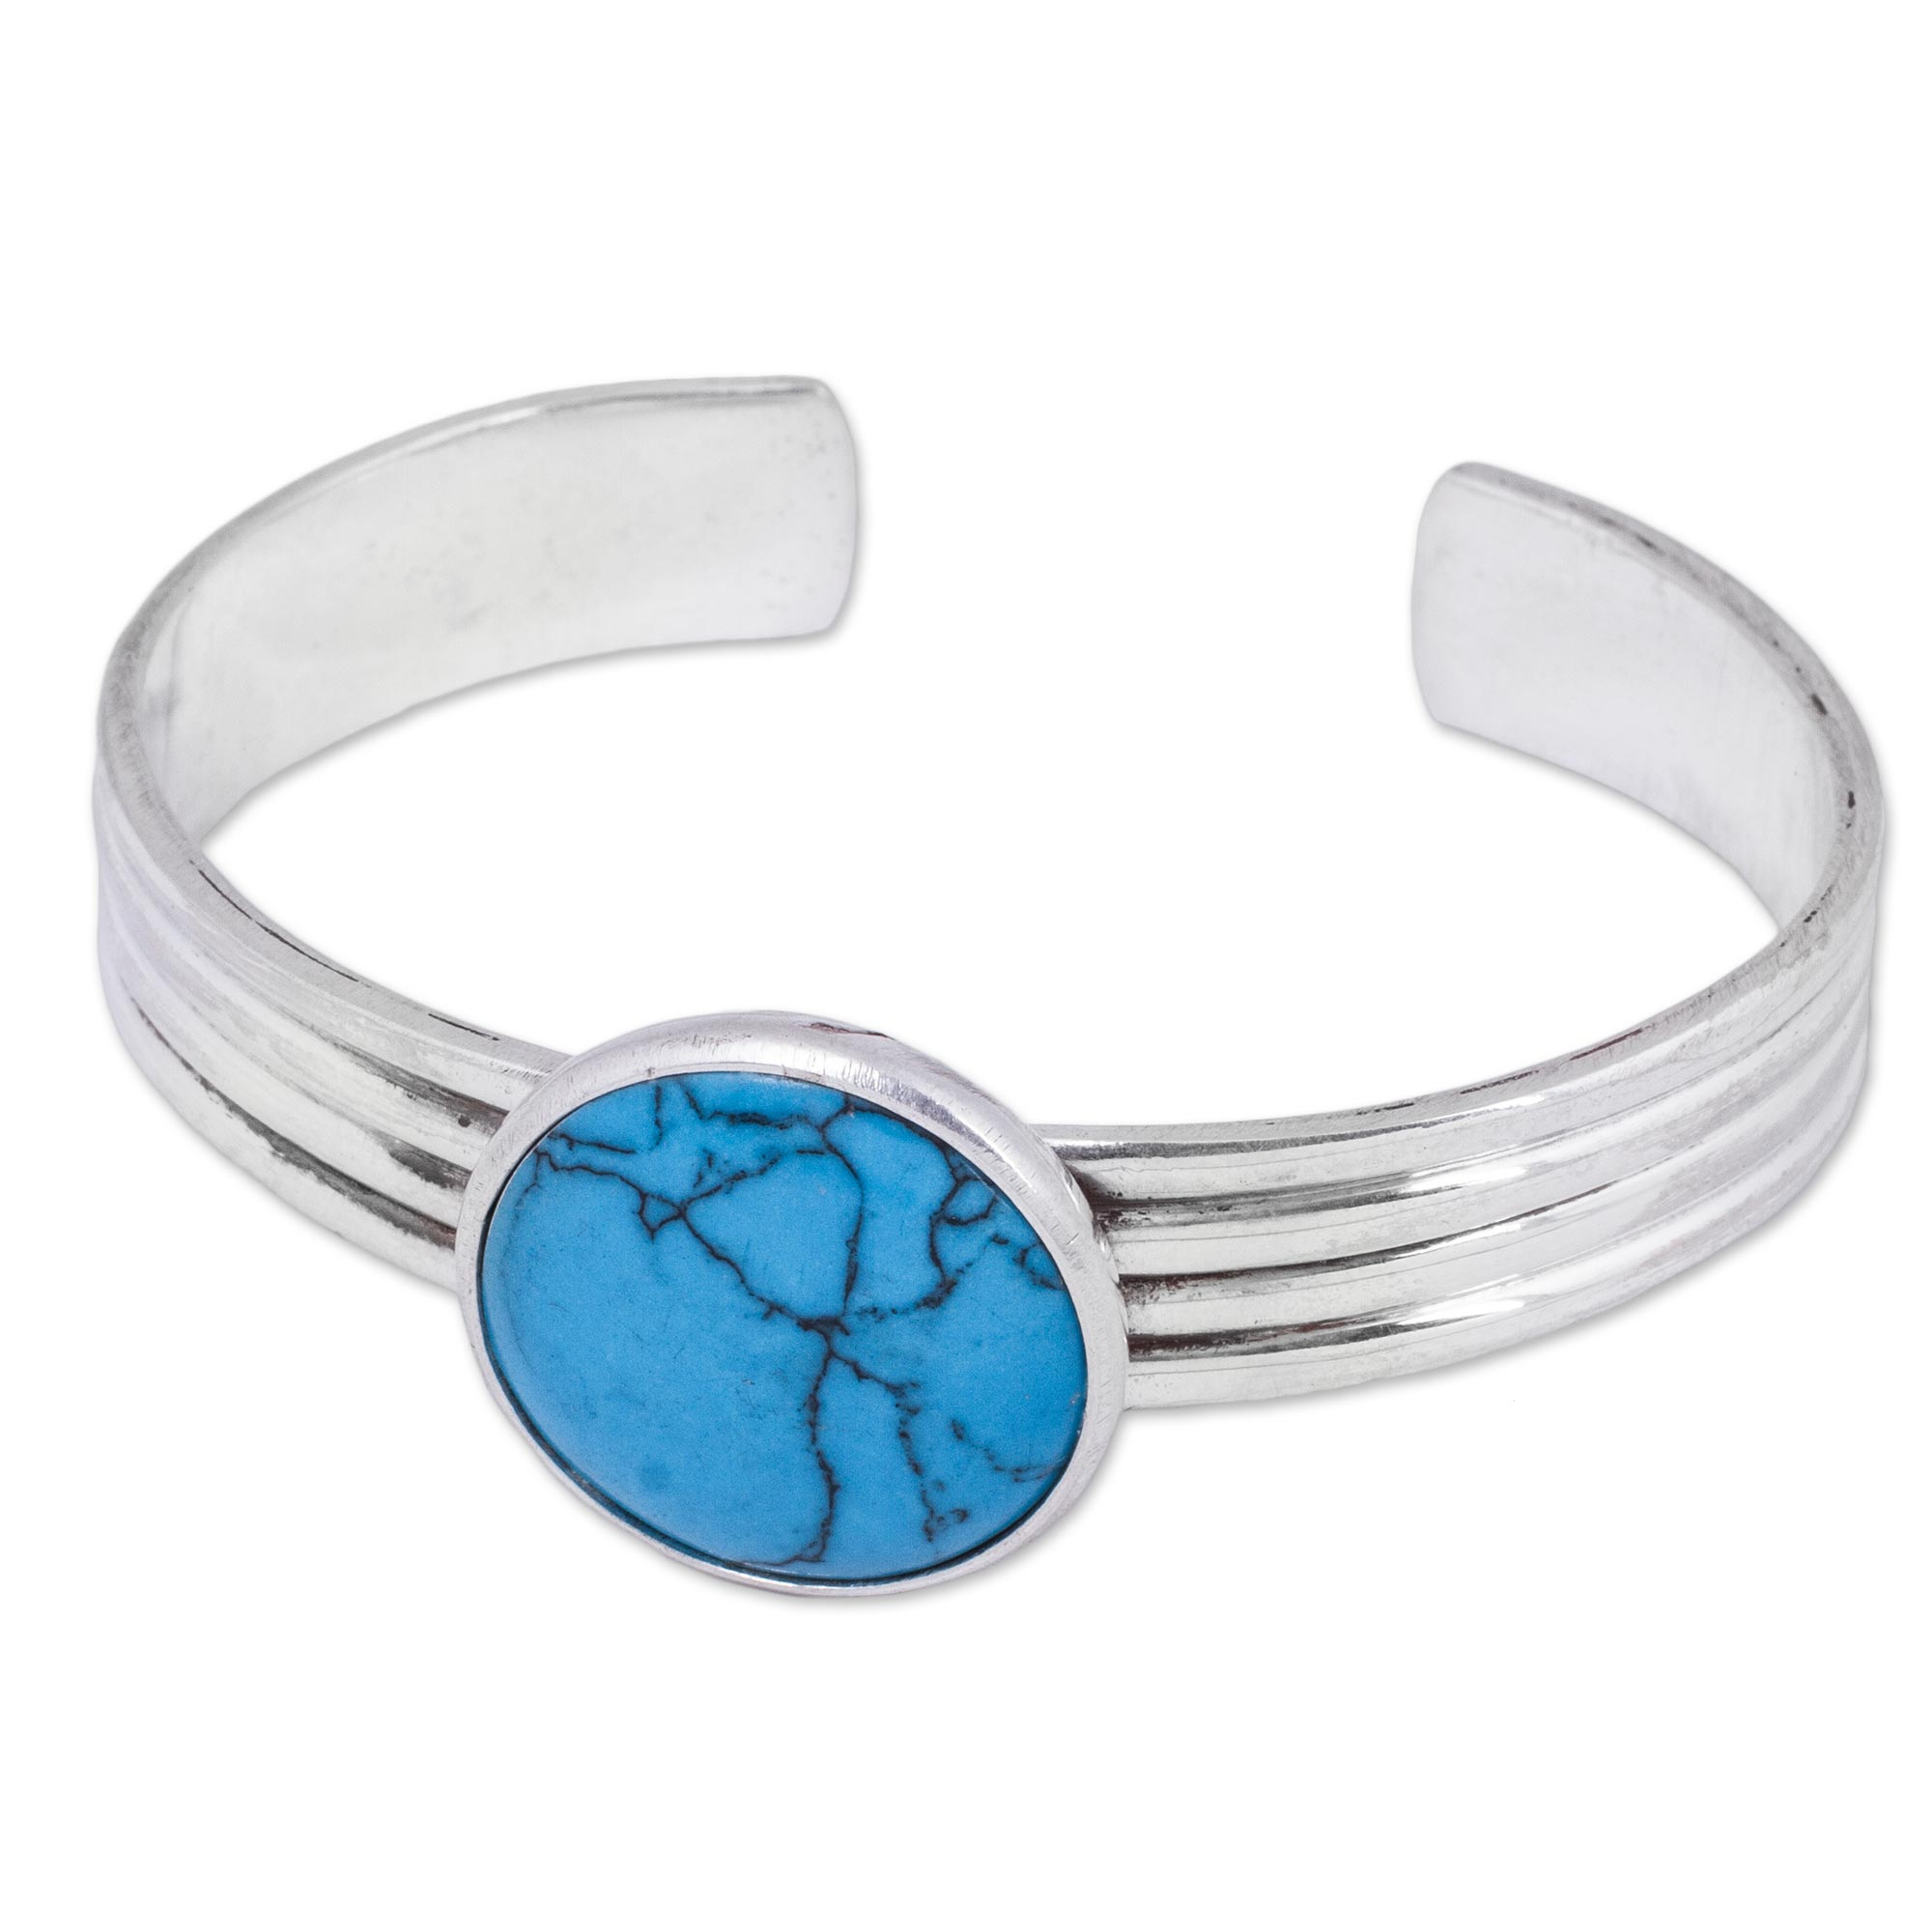 Handmade Reconstituted Turquoise and Silver Cuff Bracelet - Blue ...